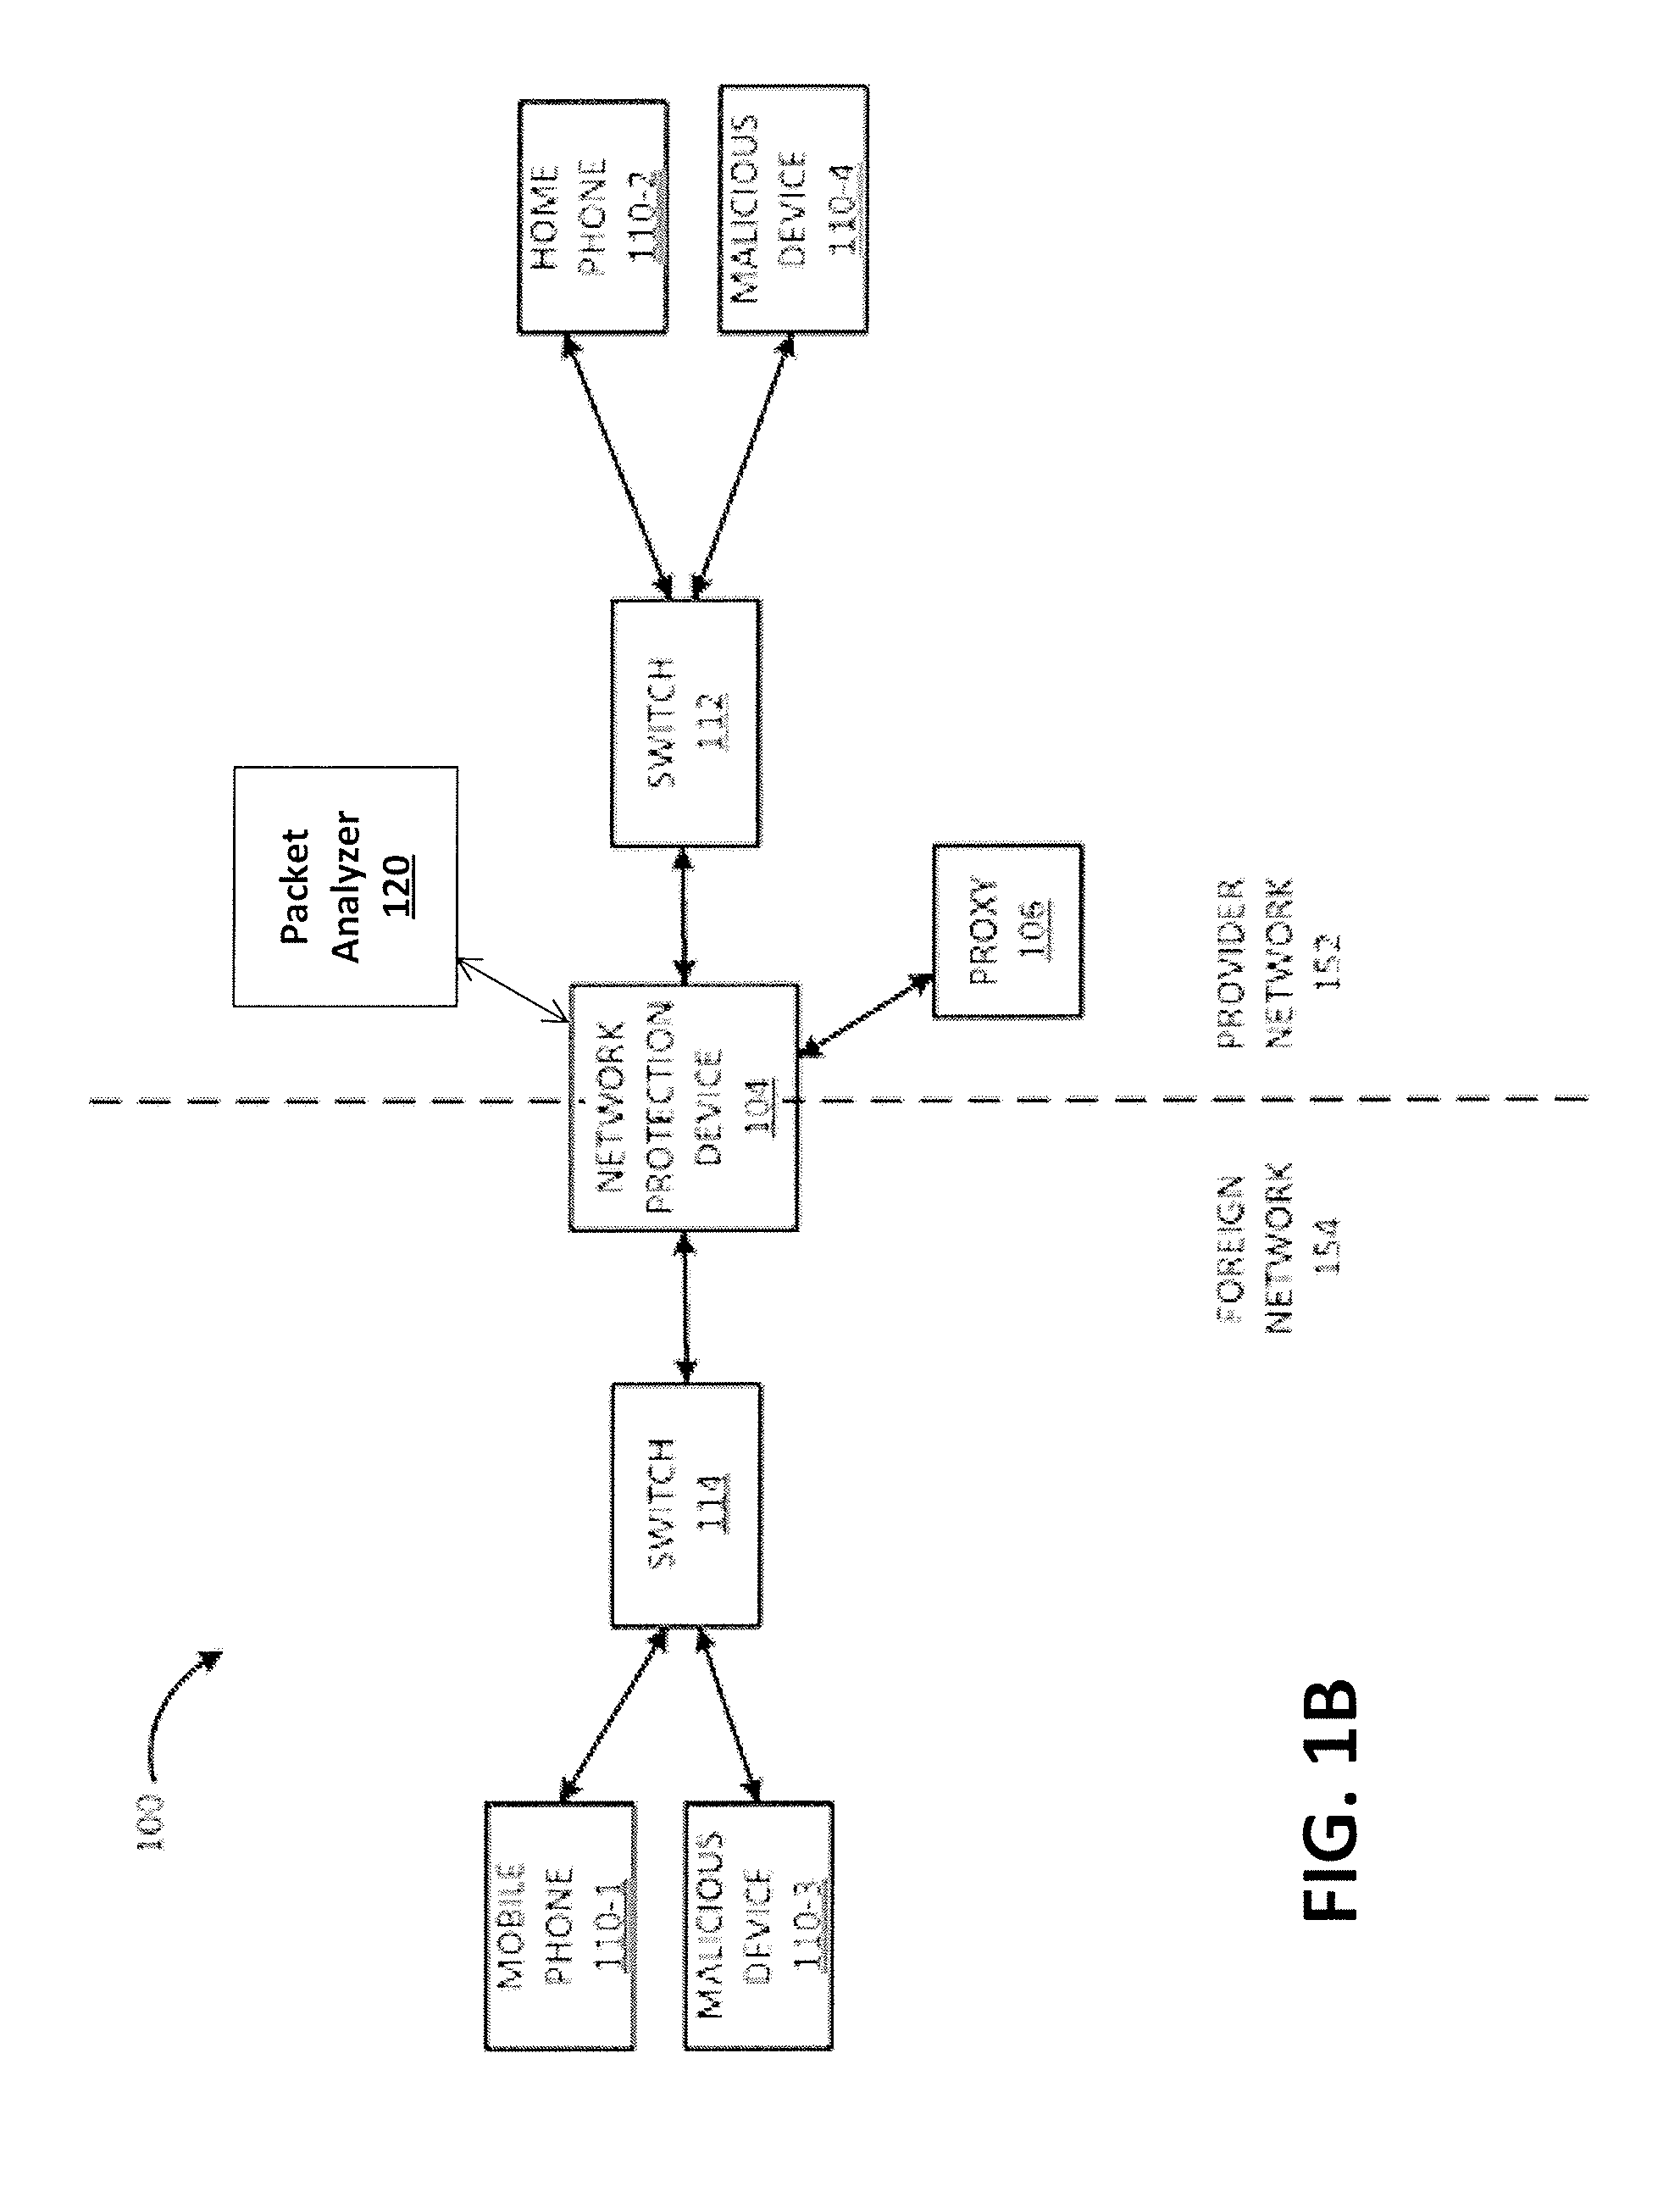 Denial of service (DOS) attack detection systems and methods